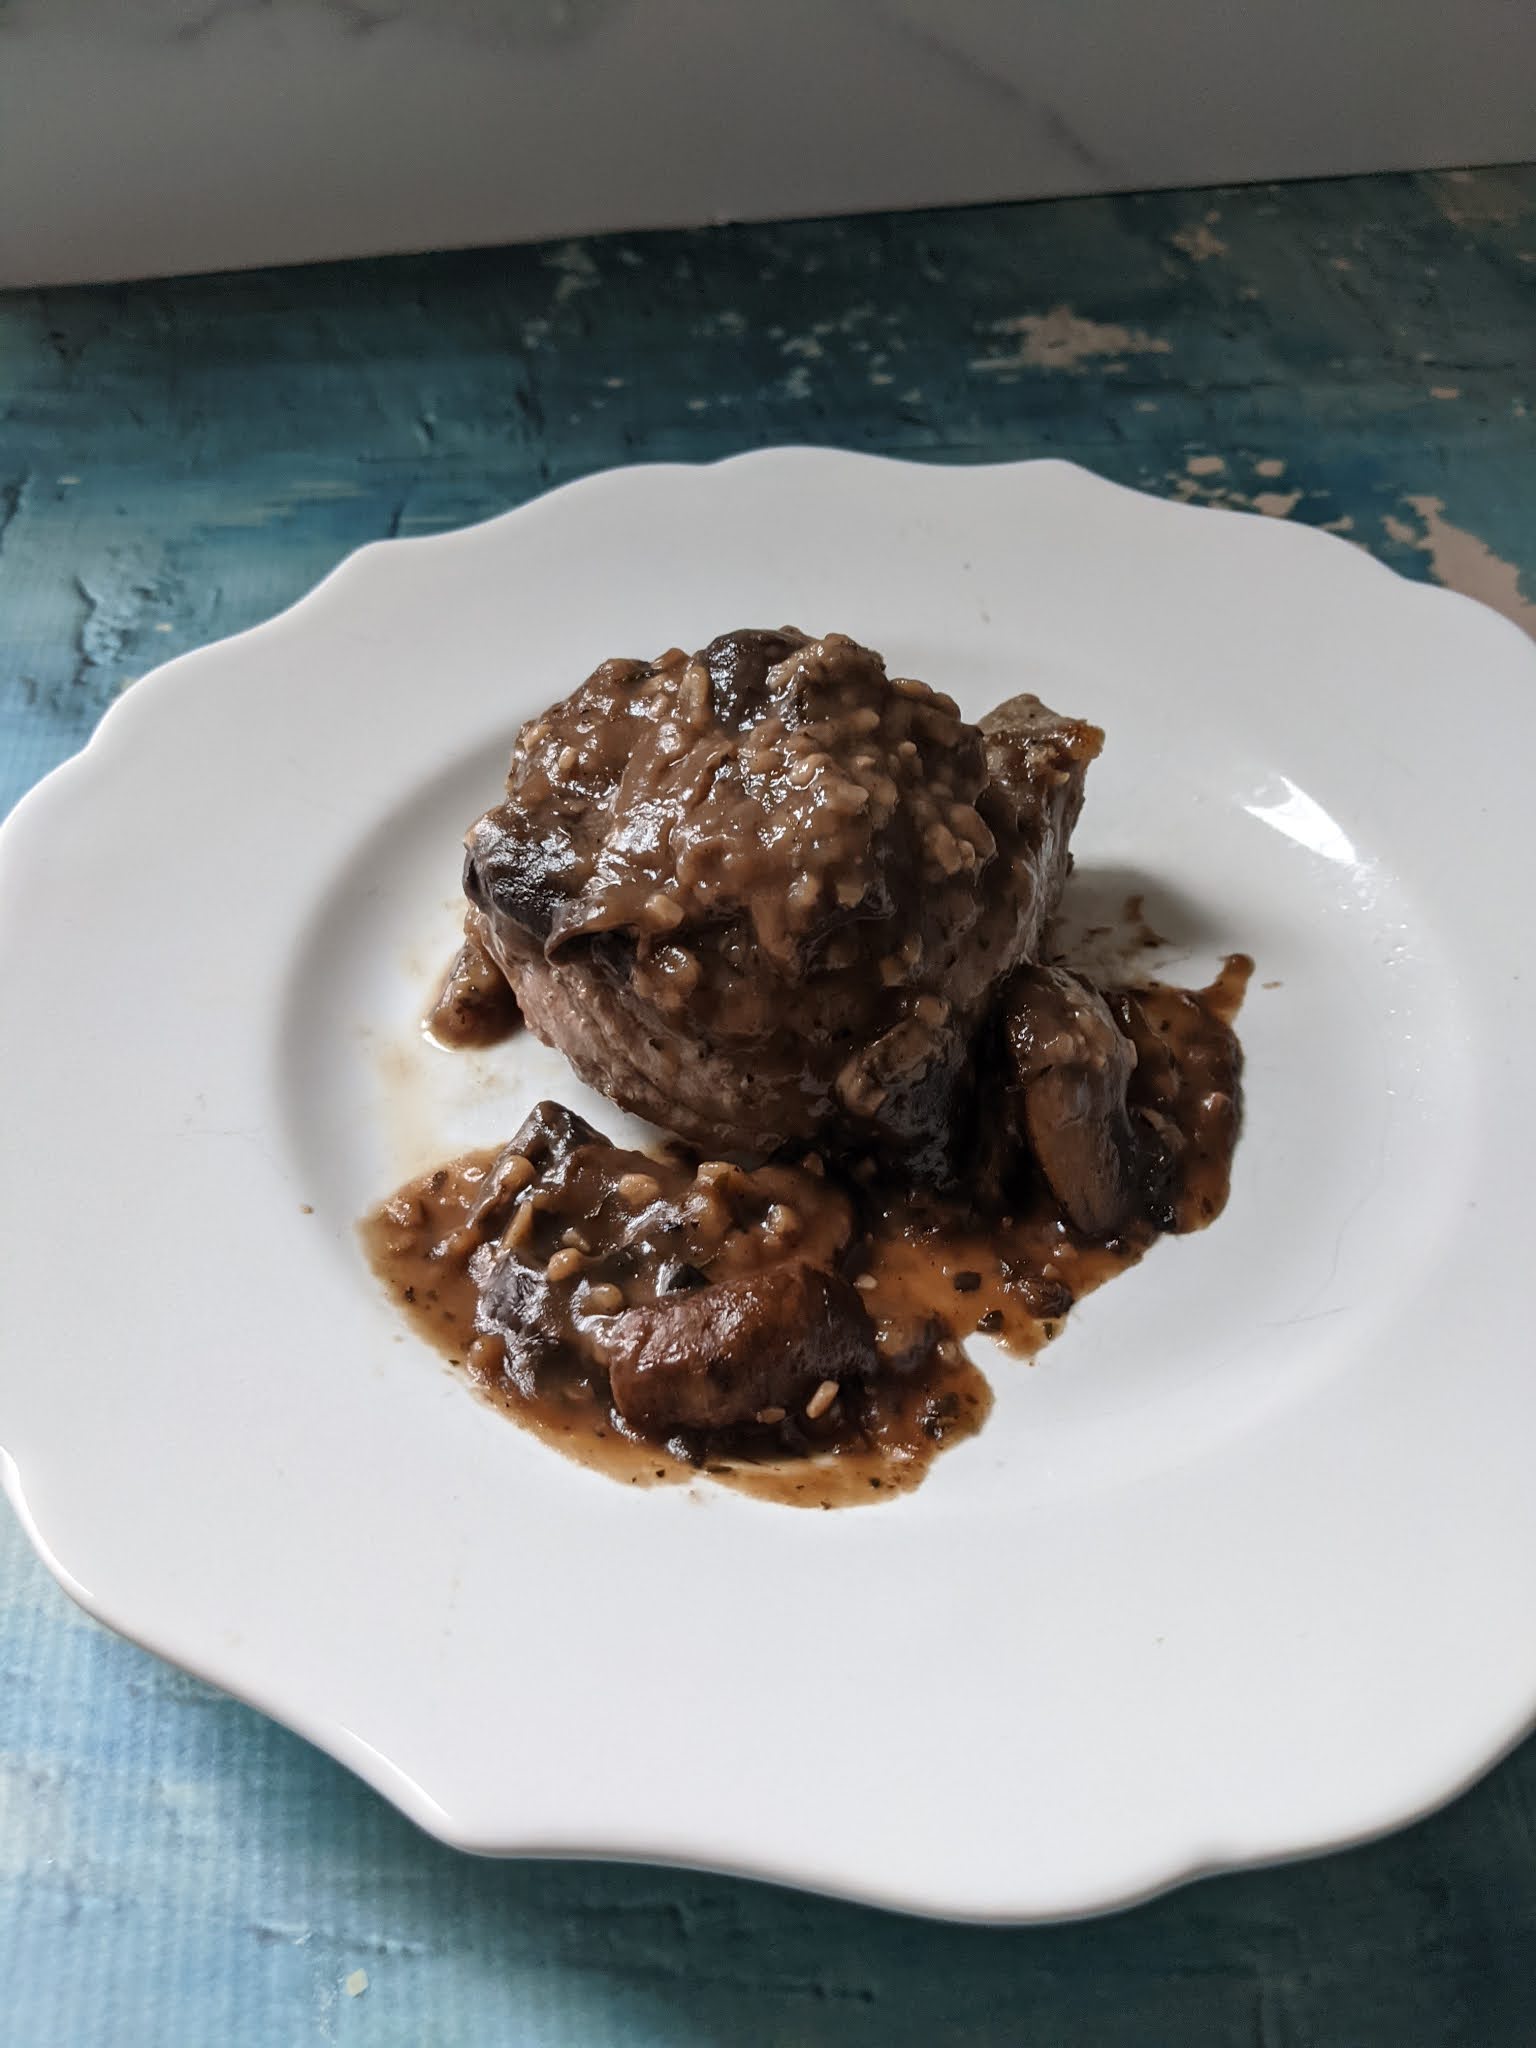 Pan Seared Filet Mignon with Mushroom Red Wine Sauce #OurFamilyTable